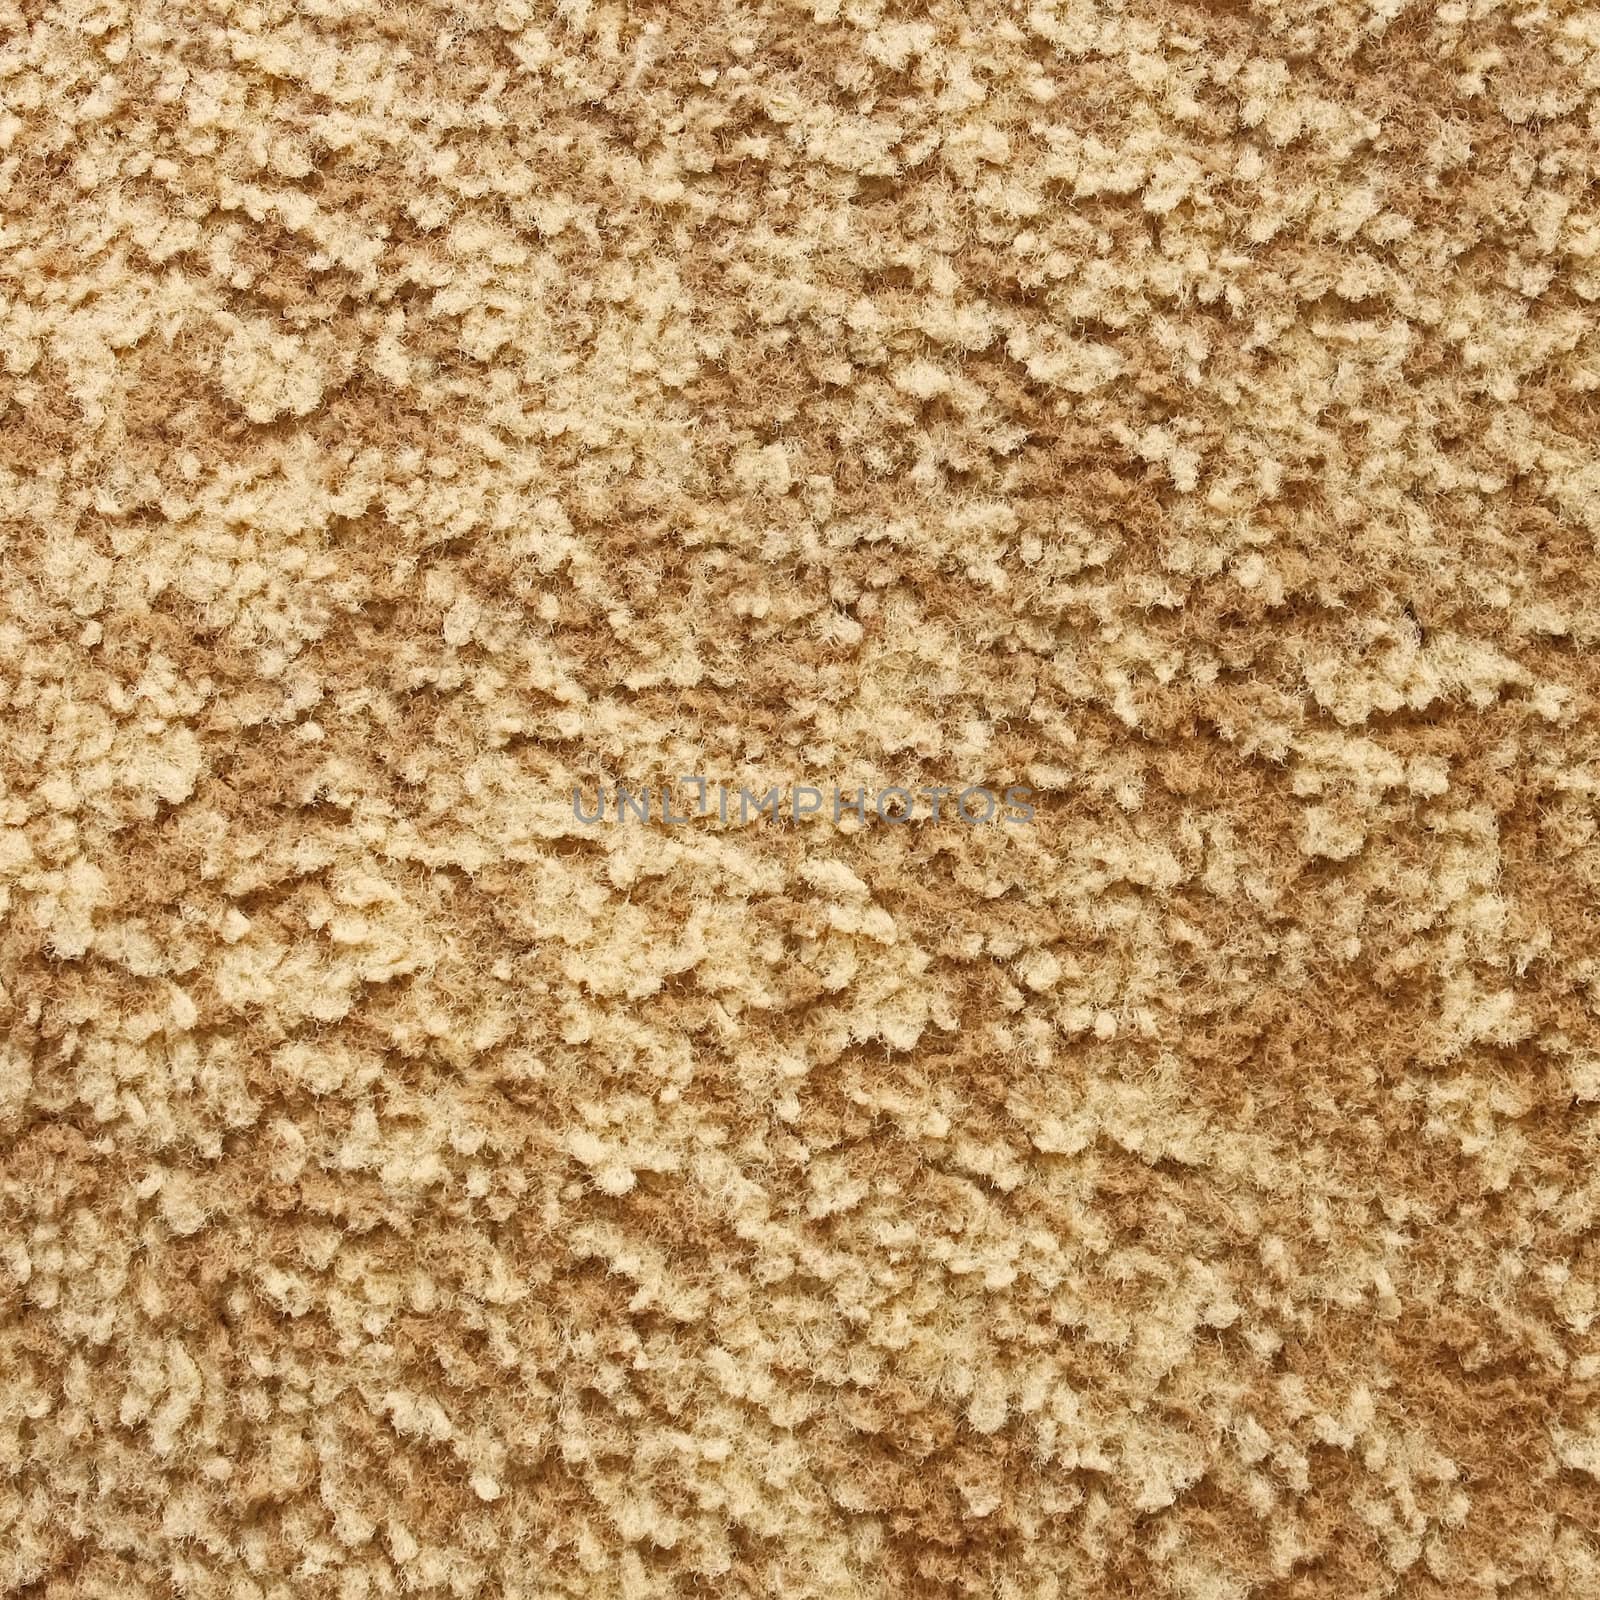 Textured details of carpet with fleecy synthetic fabric of beige color close up